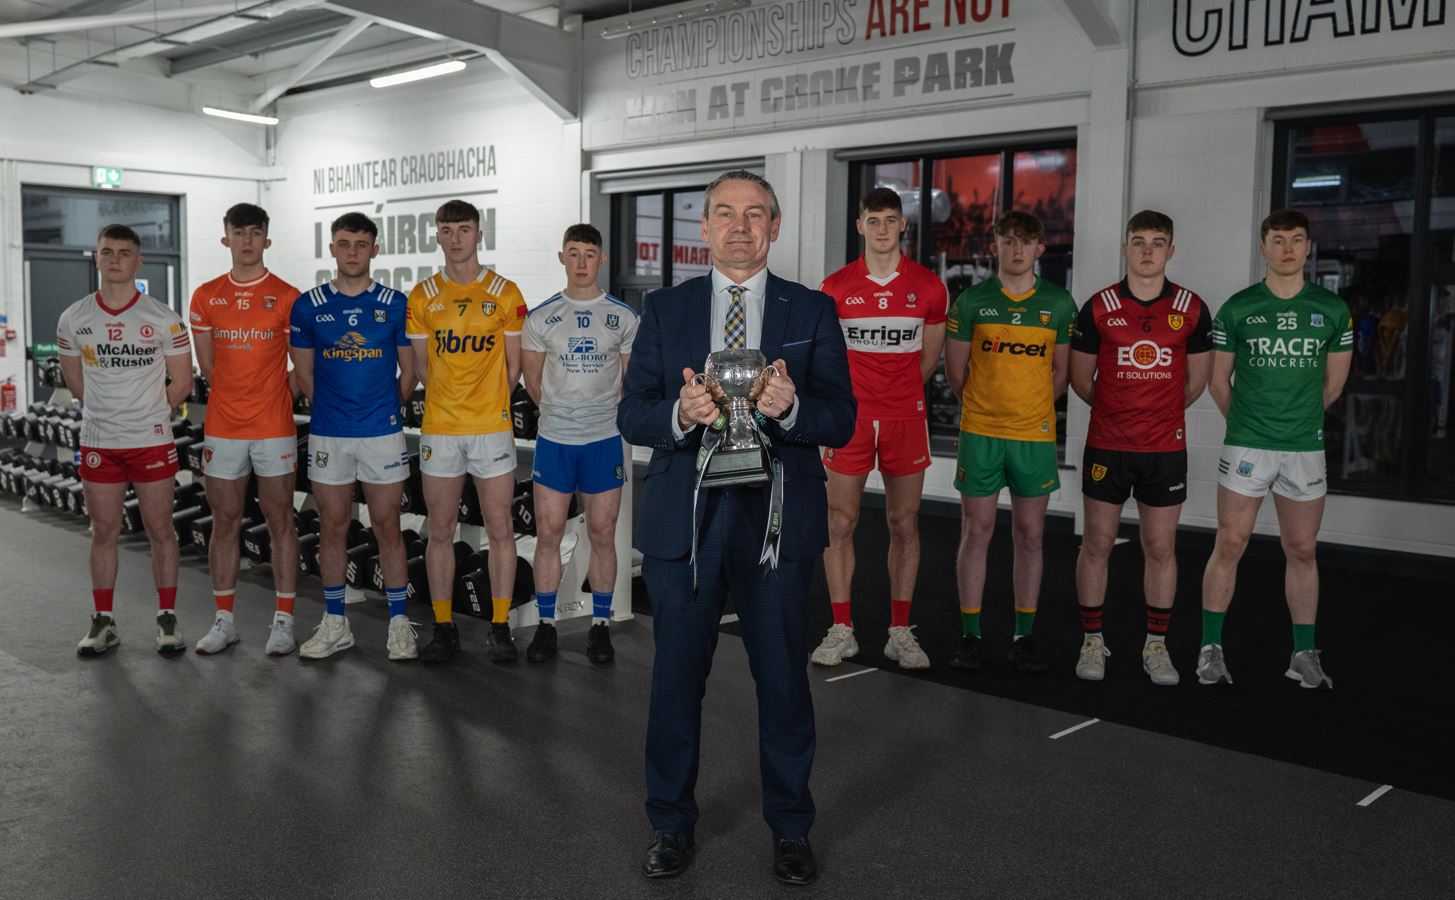 2023 EirGrid Ulster Under 20 Football Championship officially launched